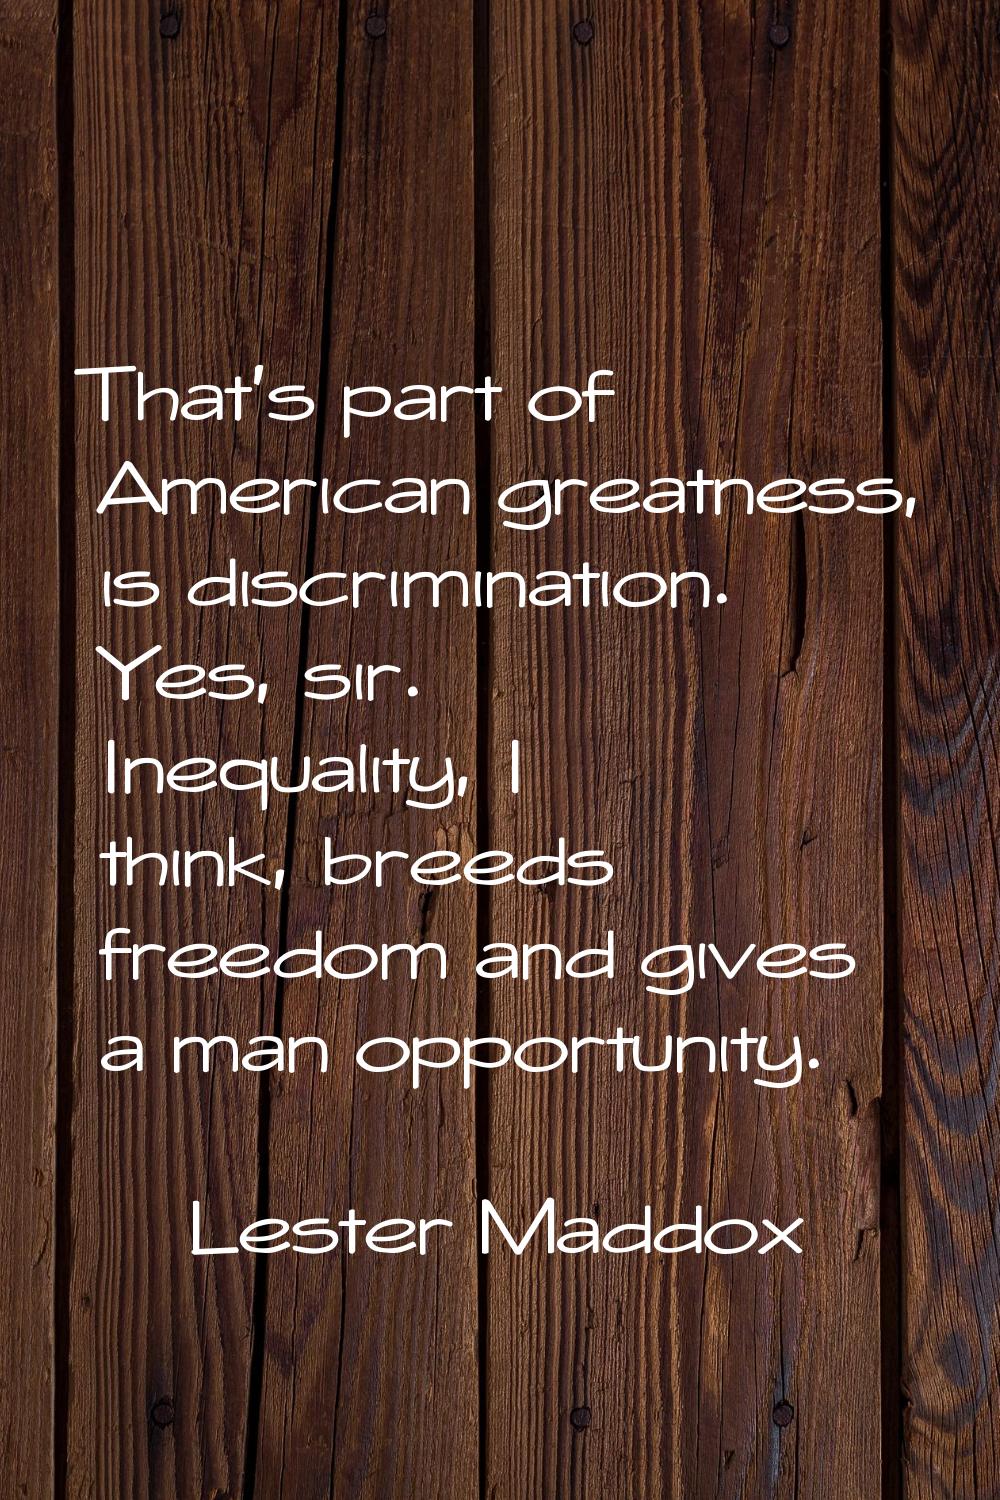 That's part of American greatness, is discrimination. Yes, sir. Inequality, I think, breeds freedom